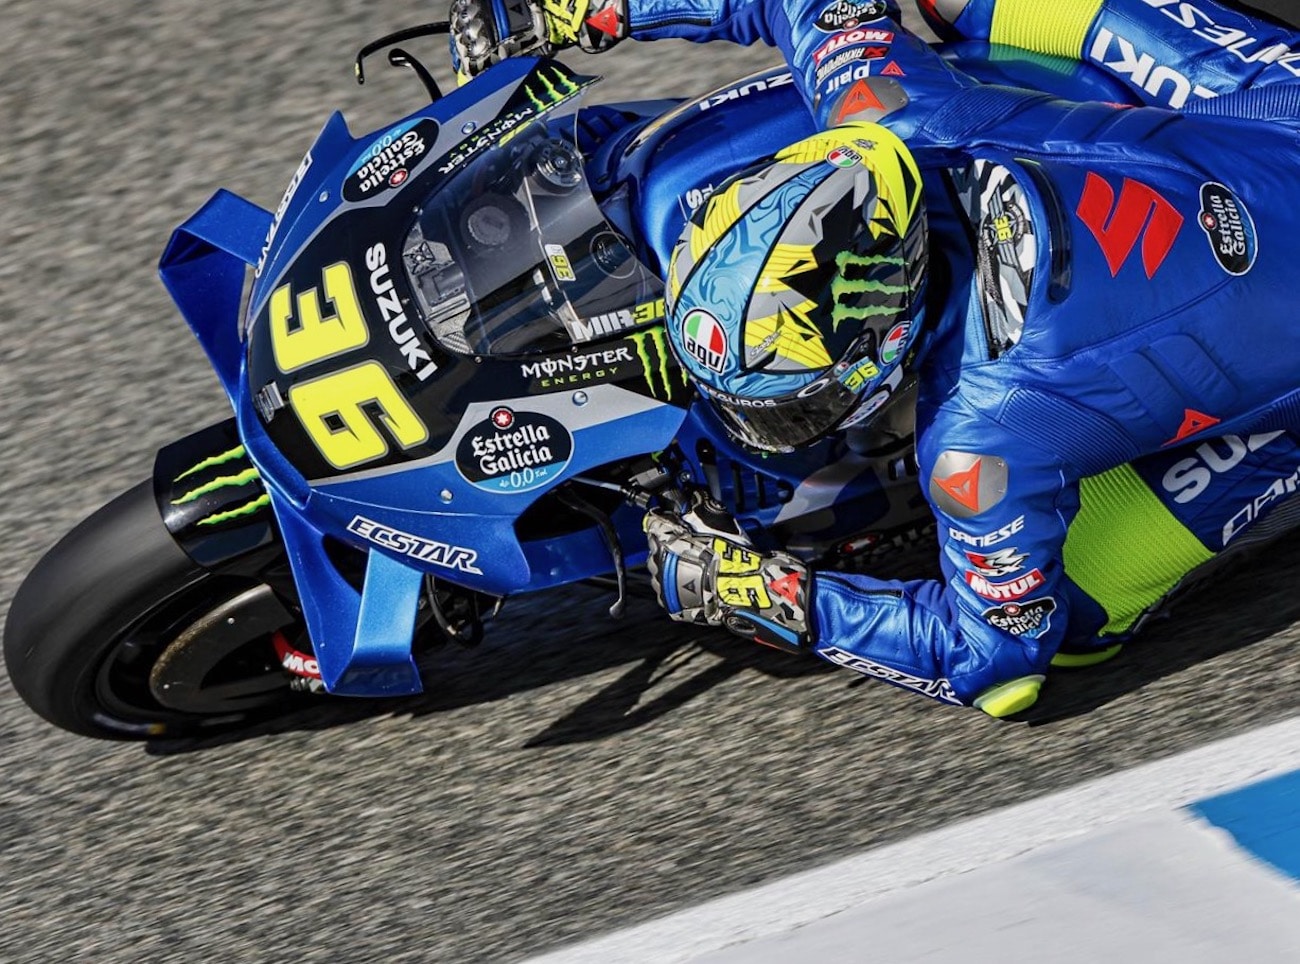 BREAKING NEWS! SUZUKI WILL PULL OUT OF MOTOGP AFTER THIS SEASON ...